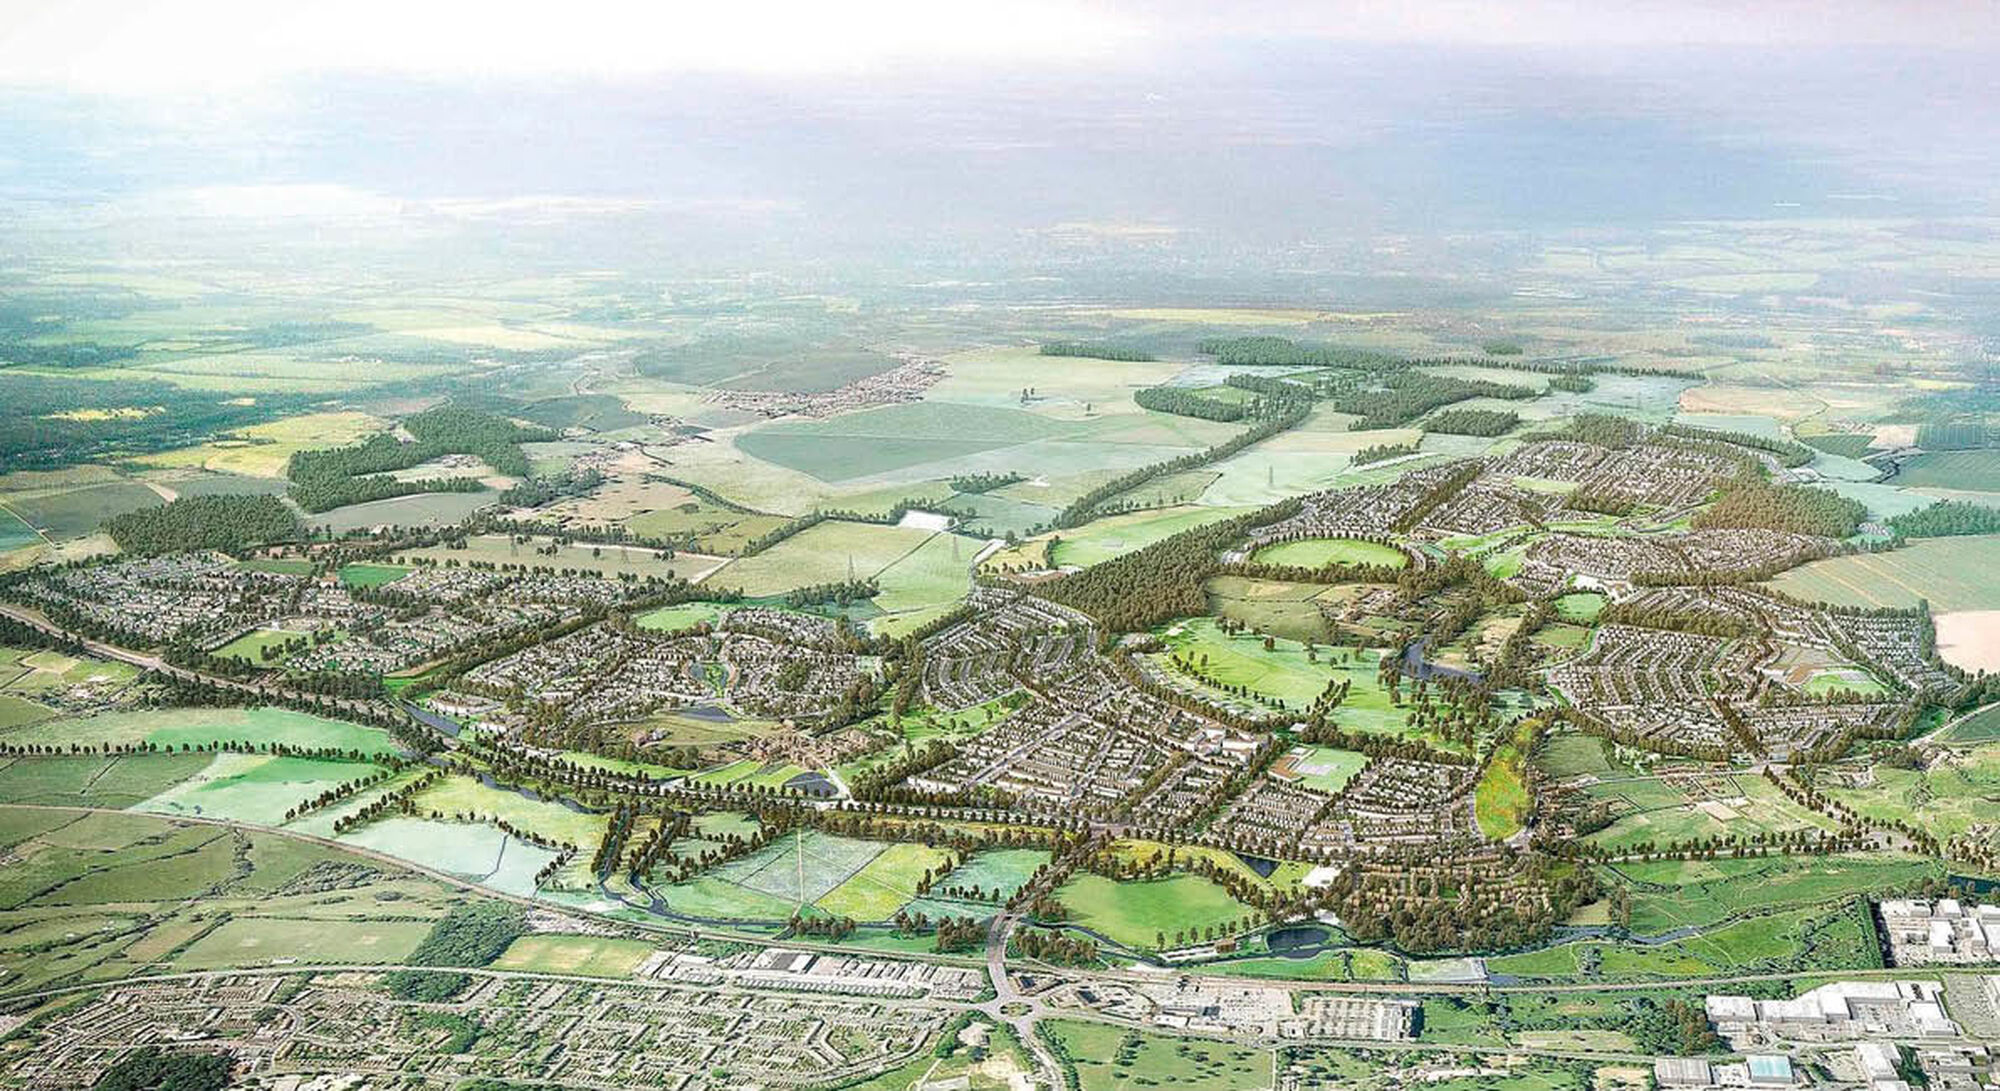 Plans approved in East Hertfordshire for 8,500 new homes and six new villages